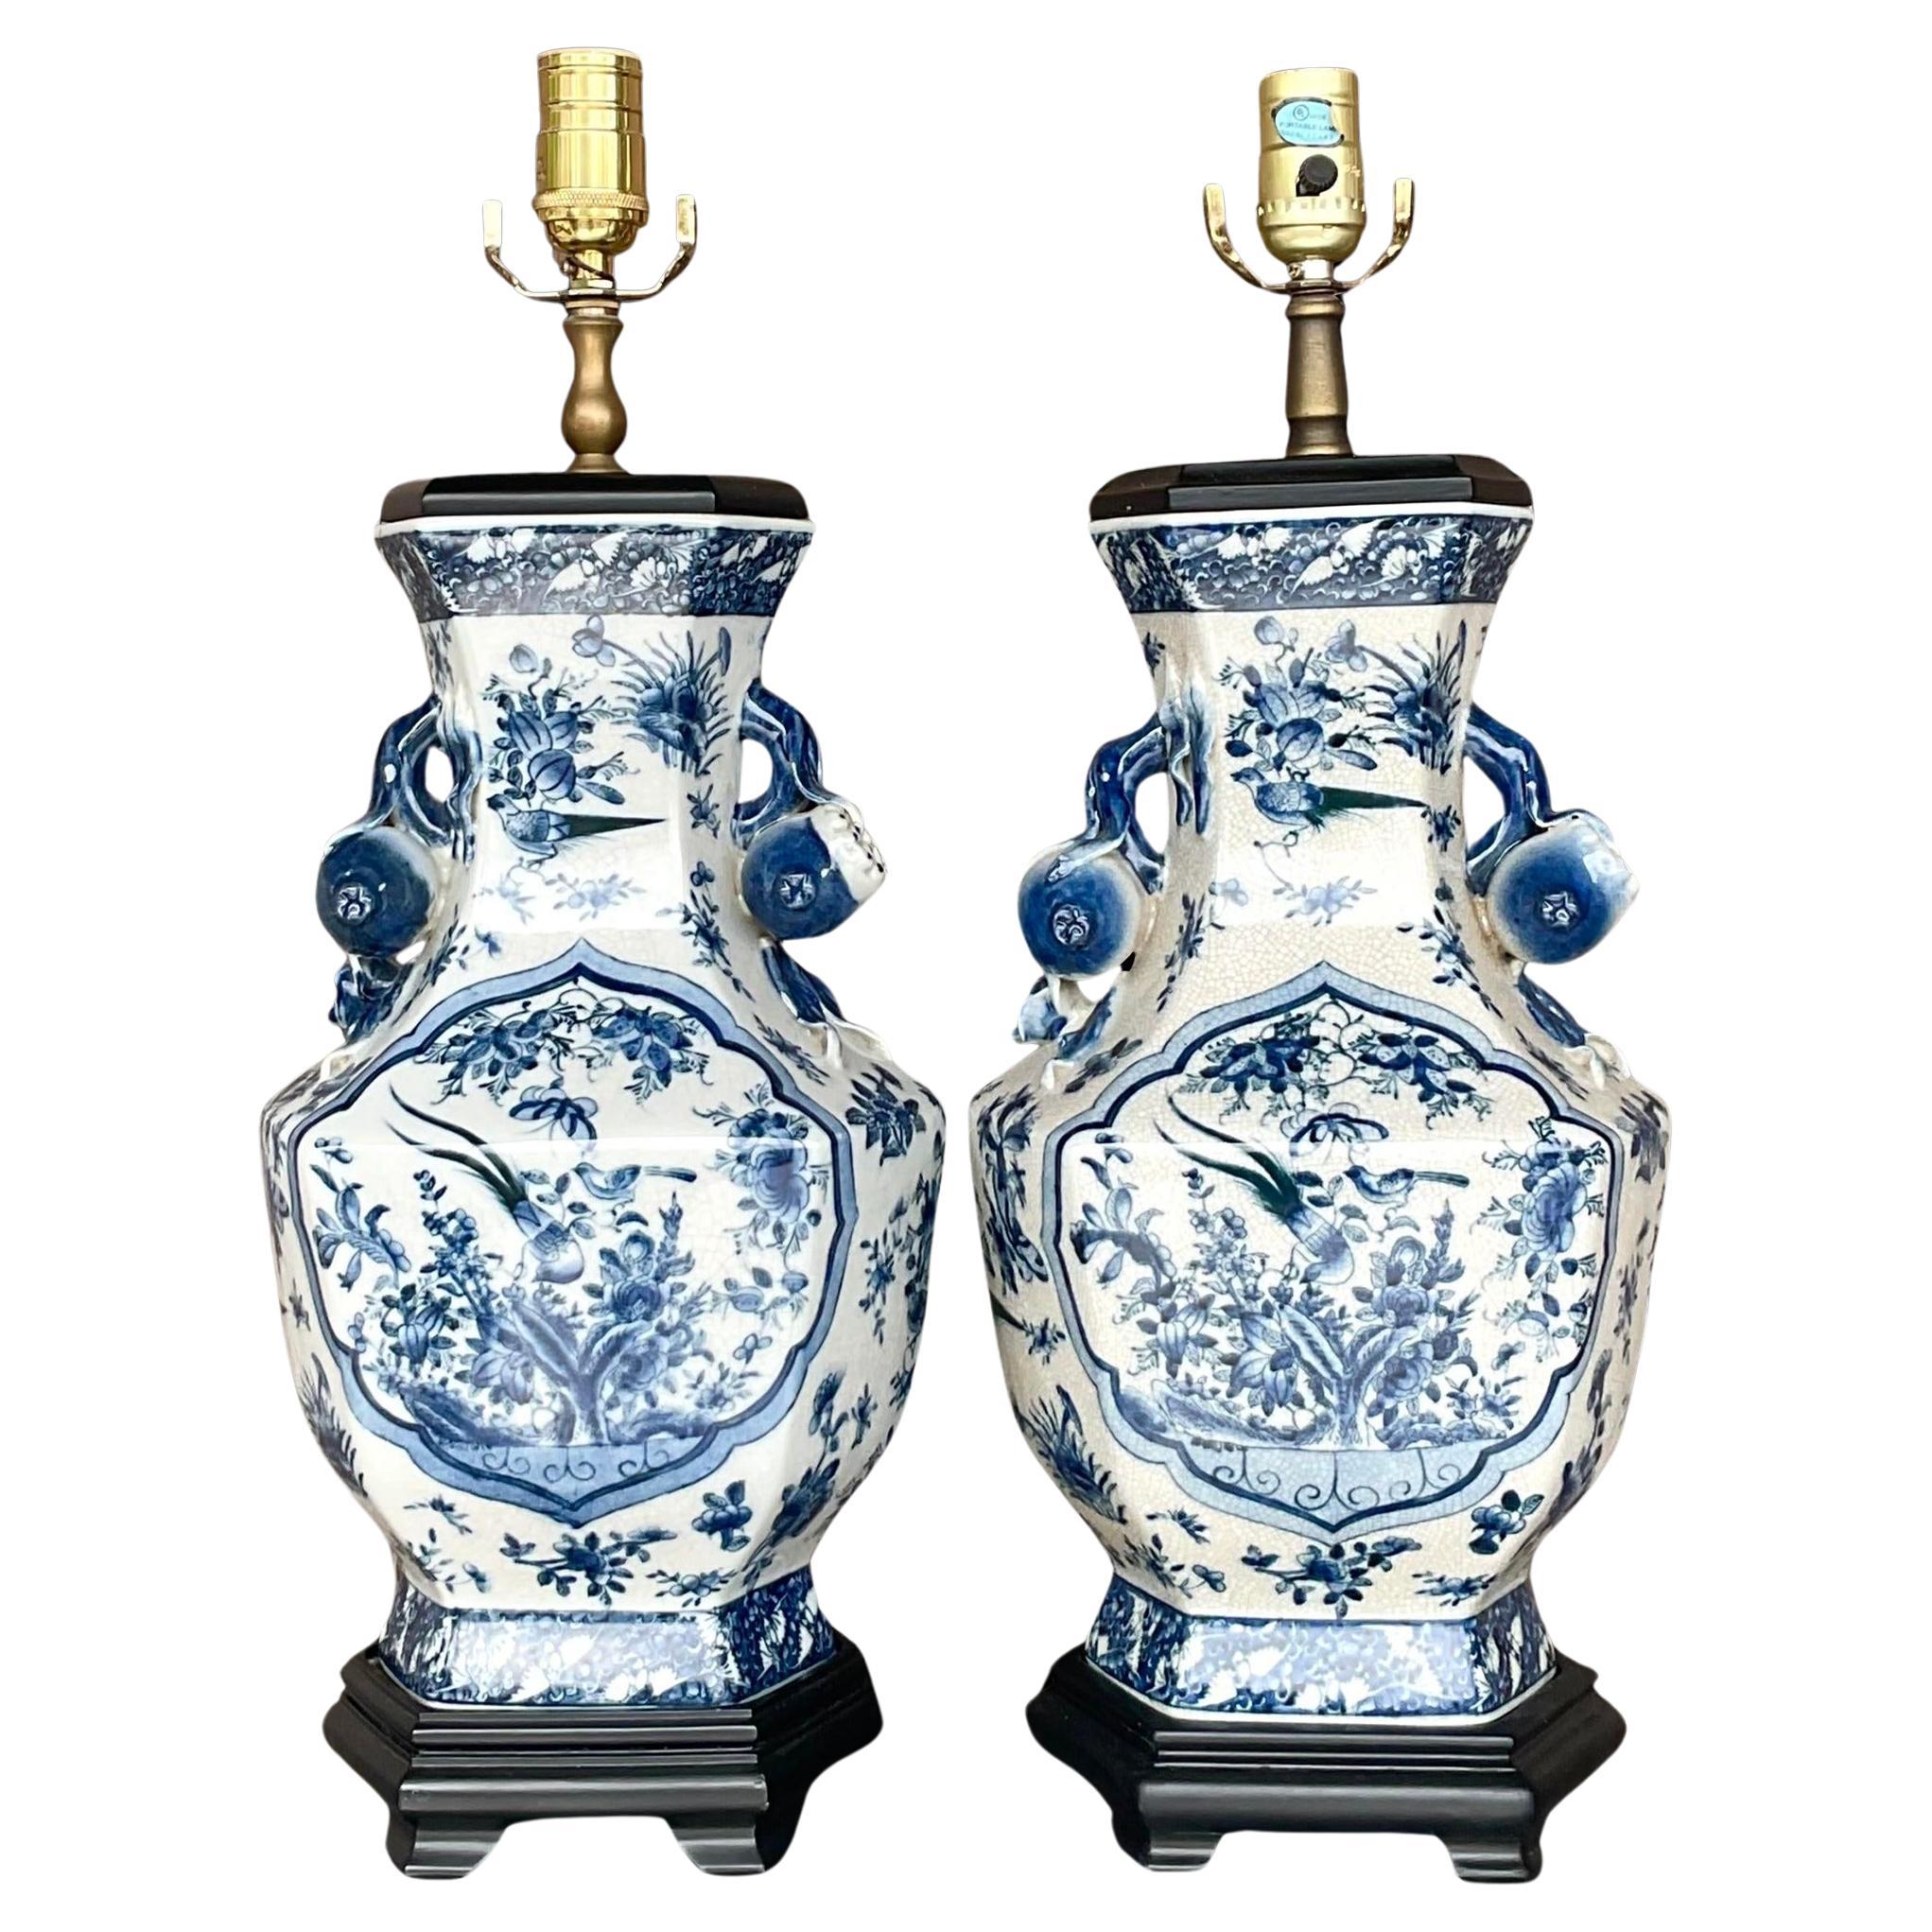 Vintage Asian Chinoiserie Ceramic Lamps - a Pair For Sale